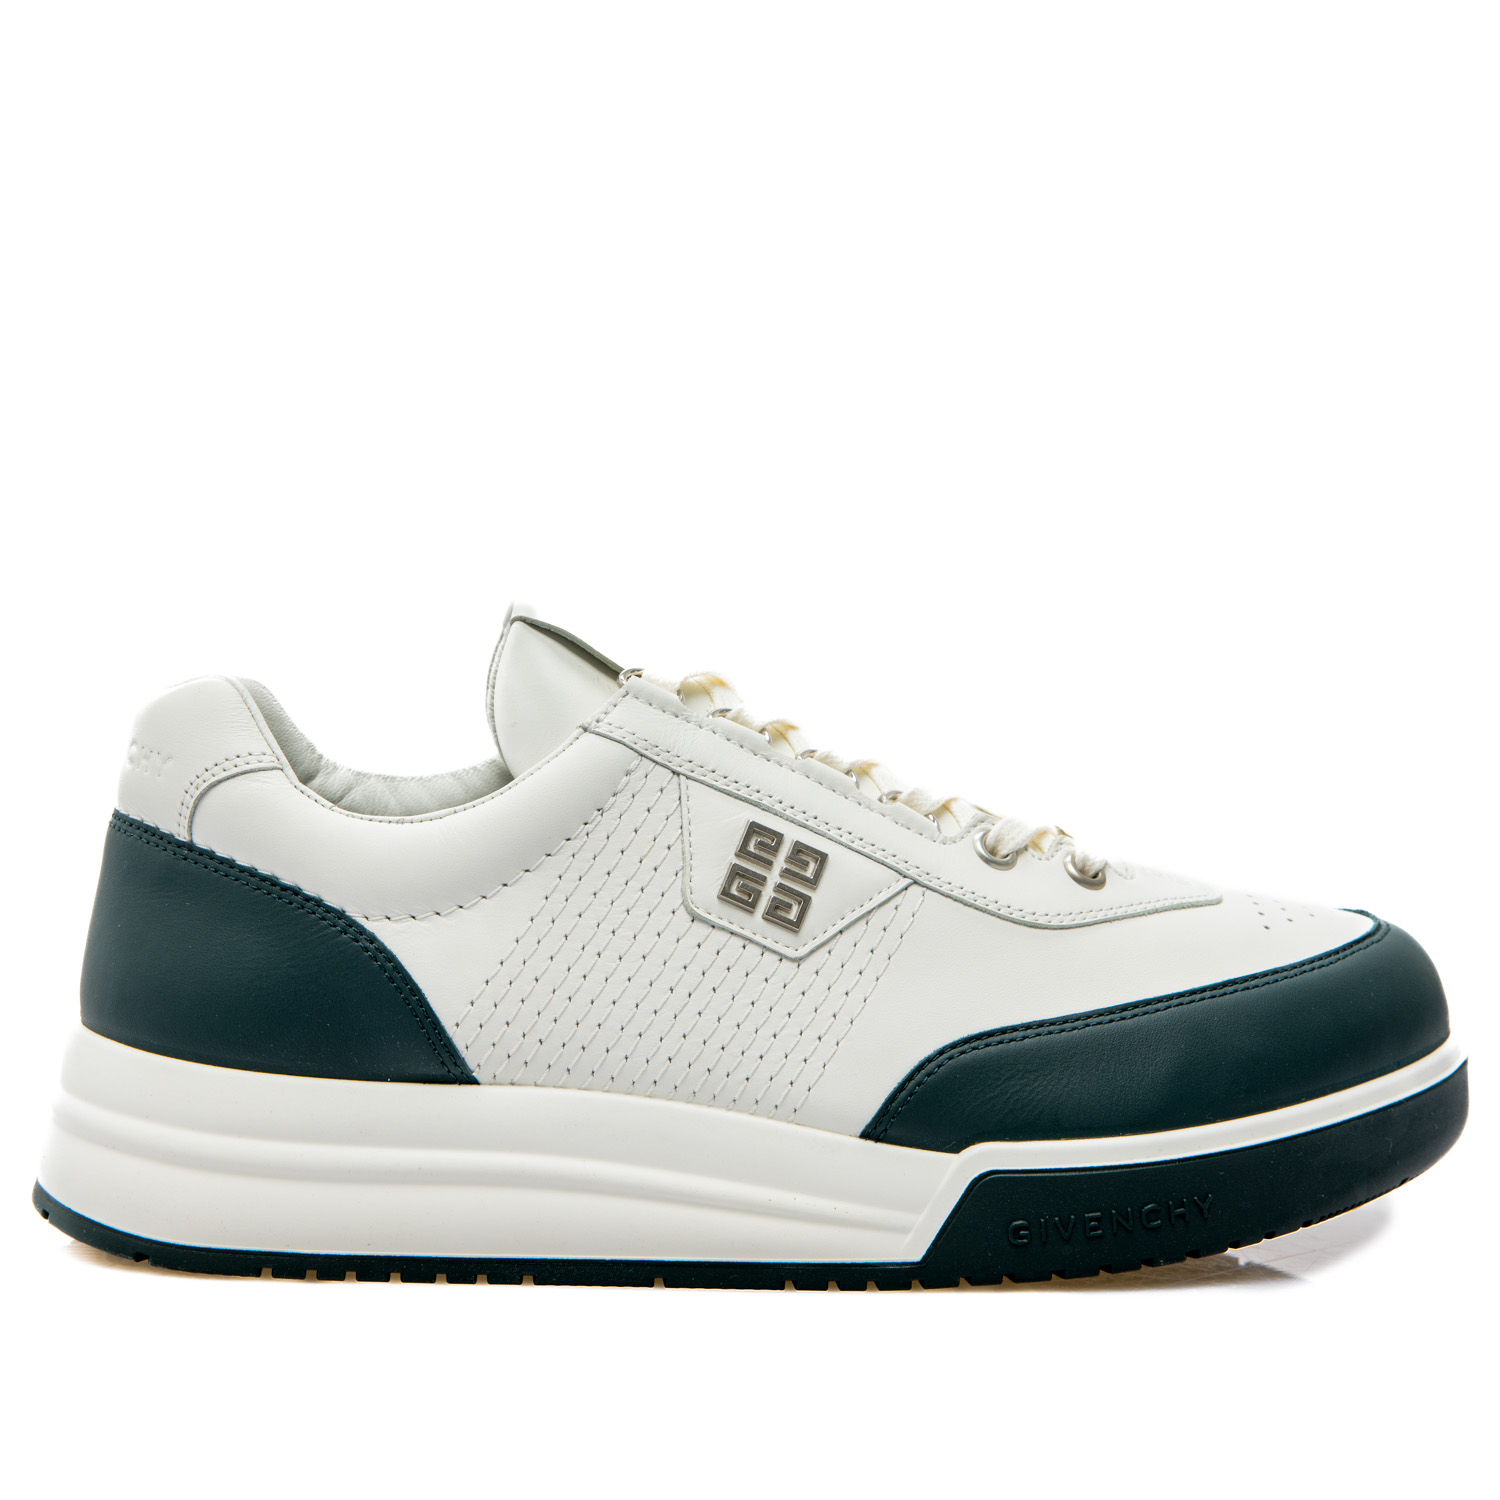 Givenchy G4 Sneakers | Credomen